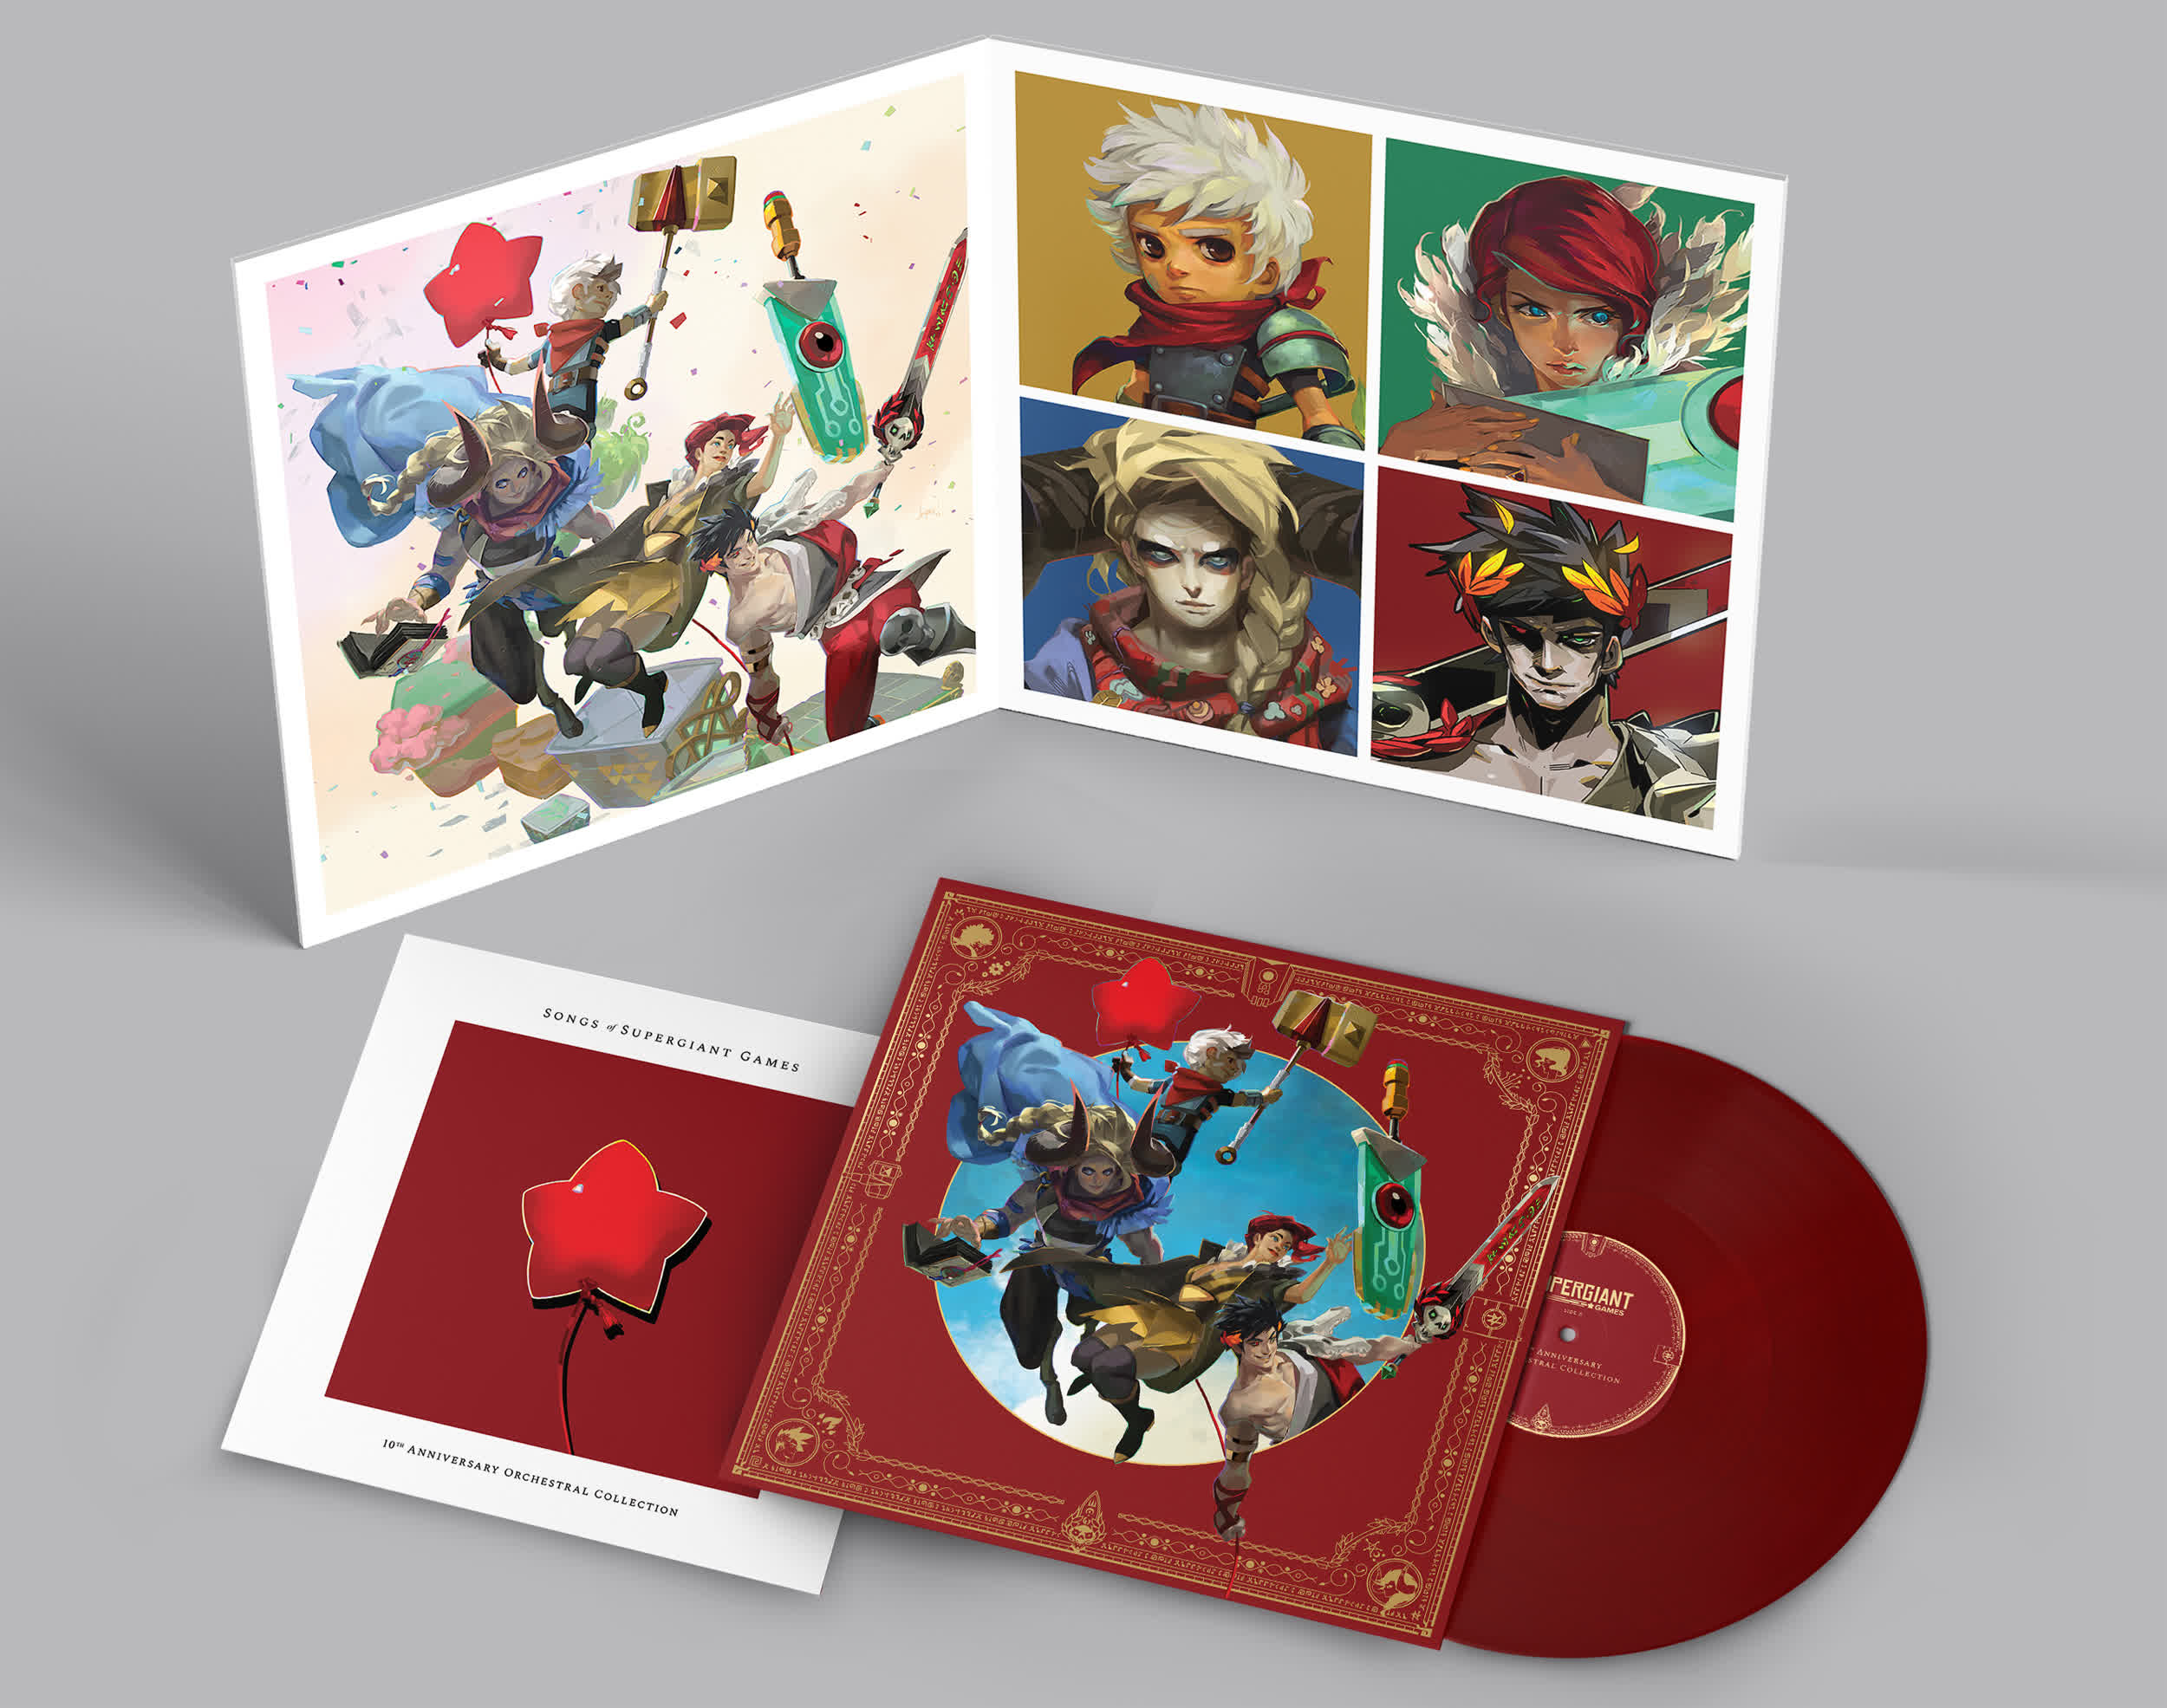 Supergiant opens pre-orders for 10th anniversary album of music from its games